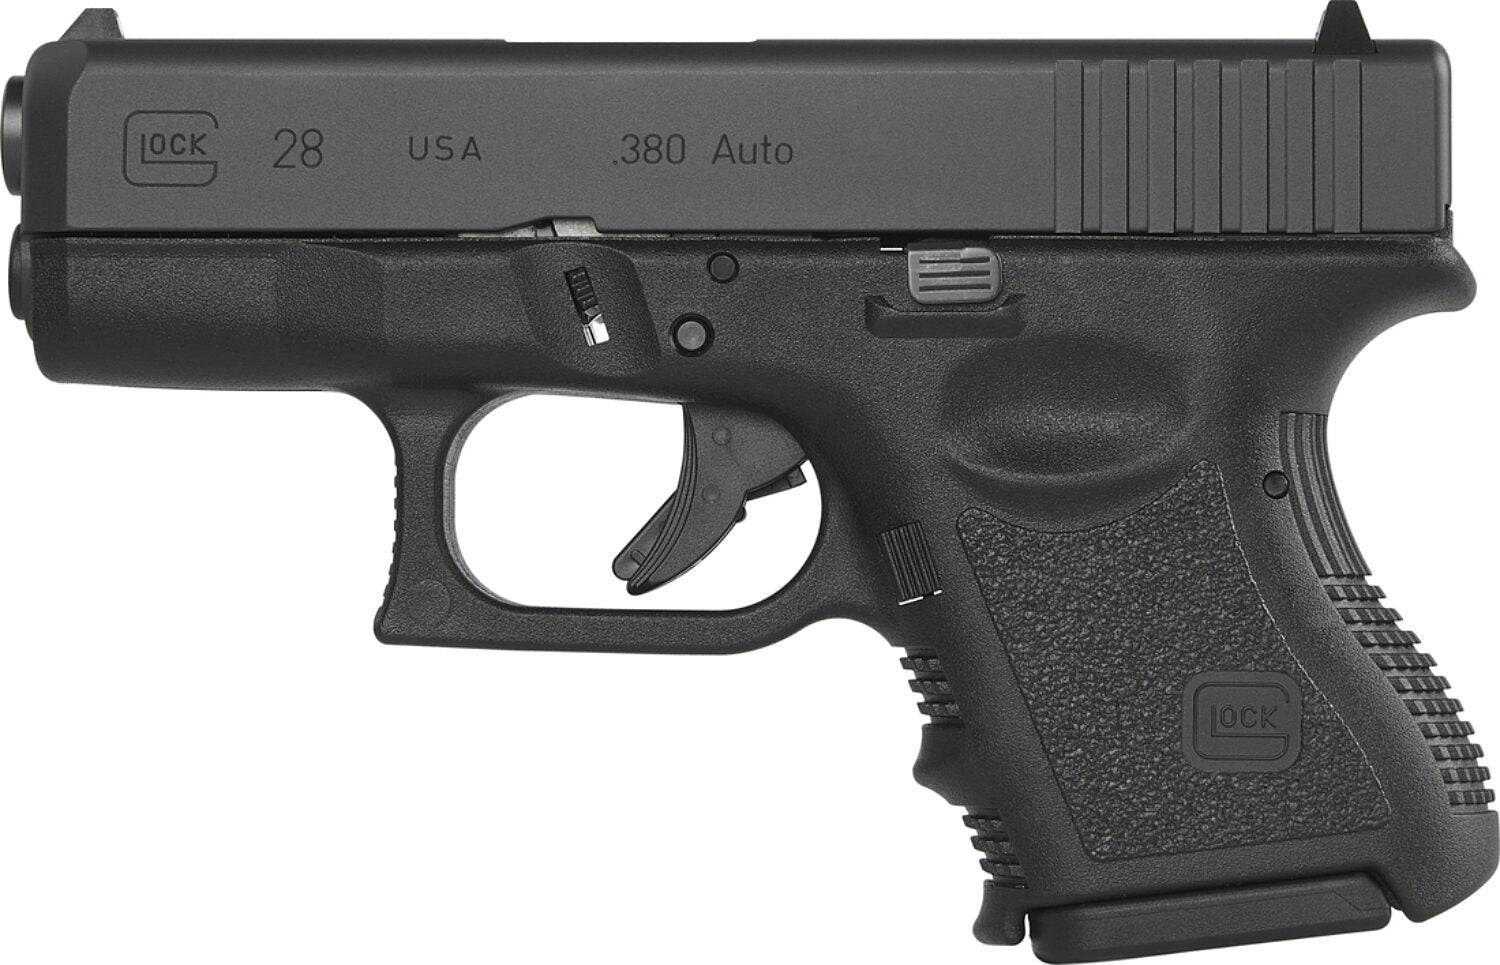 GLOCK 28 USA: TALO Introduces the G28 To The US Market